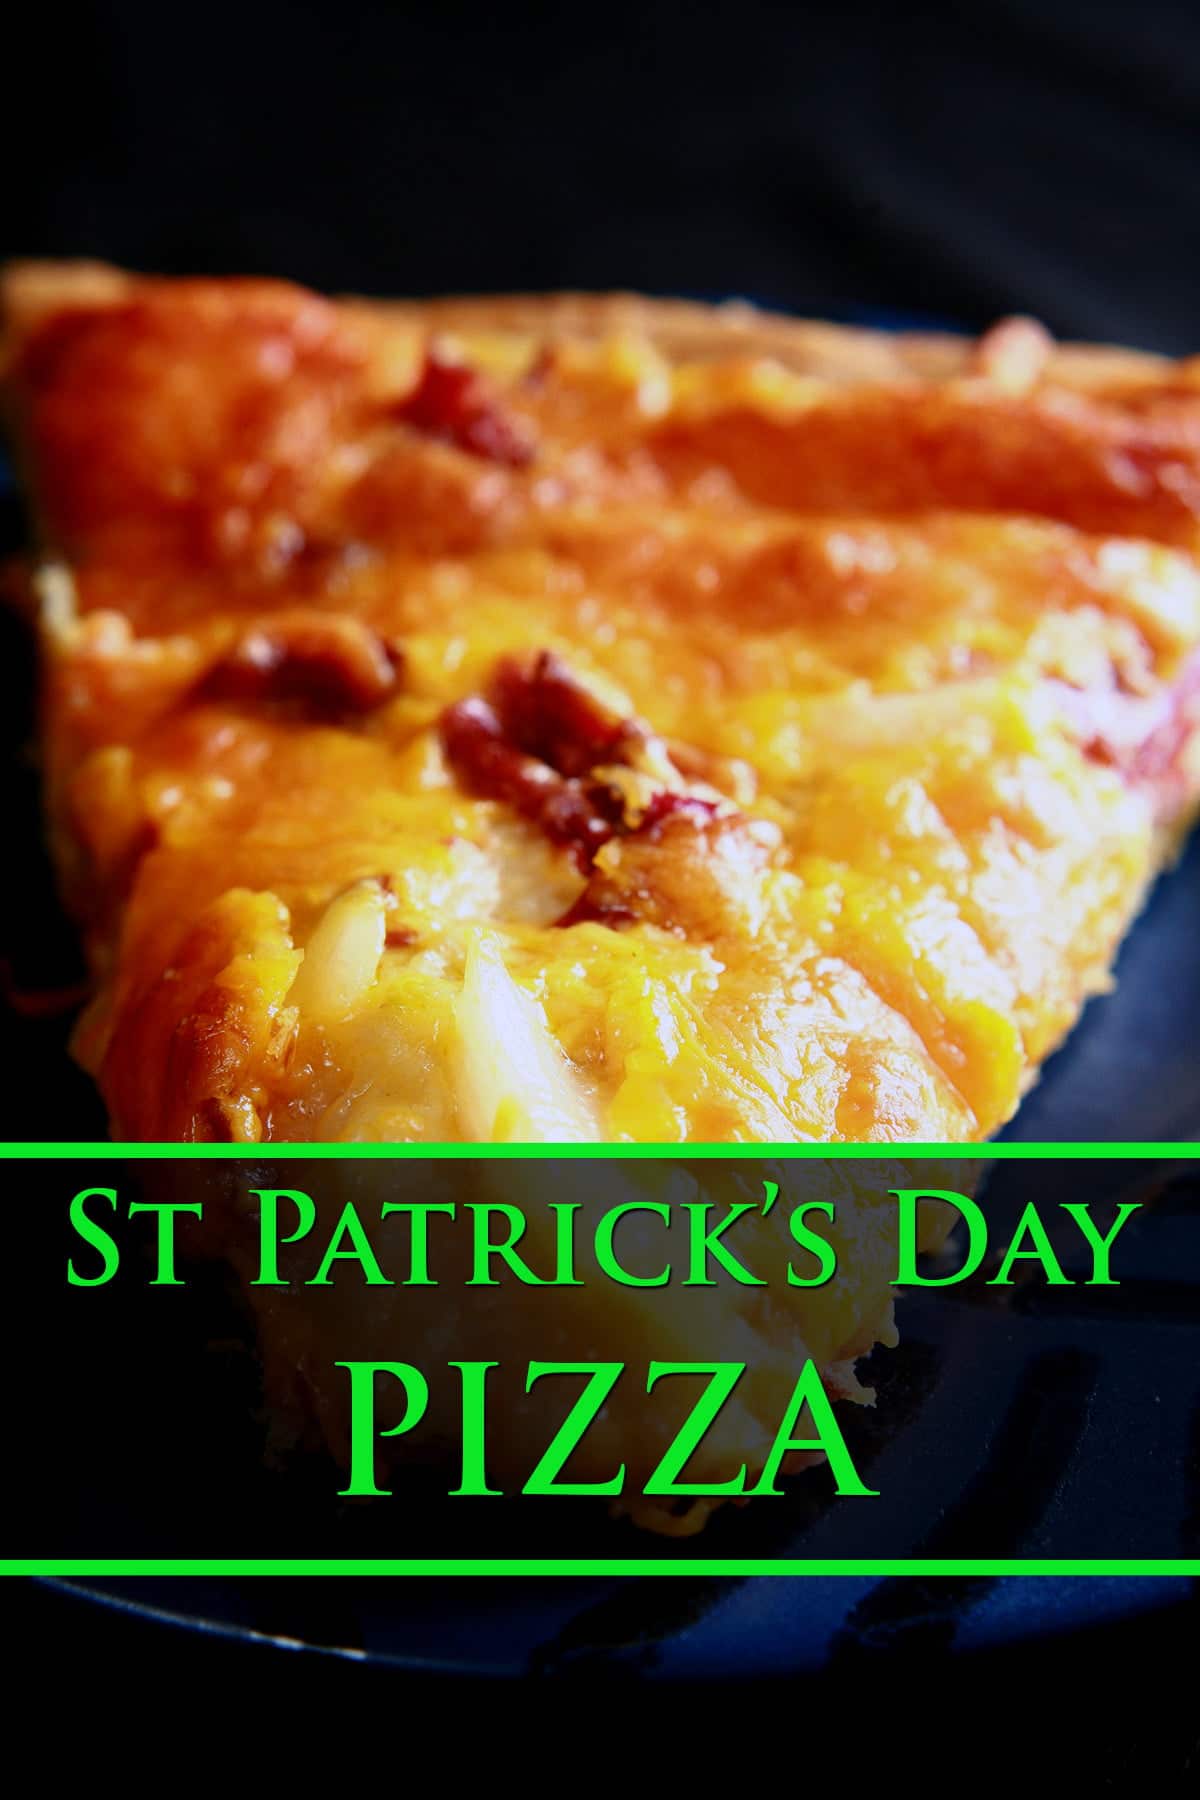 A slice of St Patrick's Day Pizza on a blue plate. Chunks of cabbage and corned beef are visible from under the cheese.